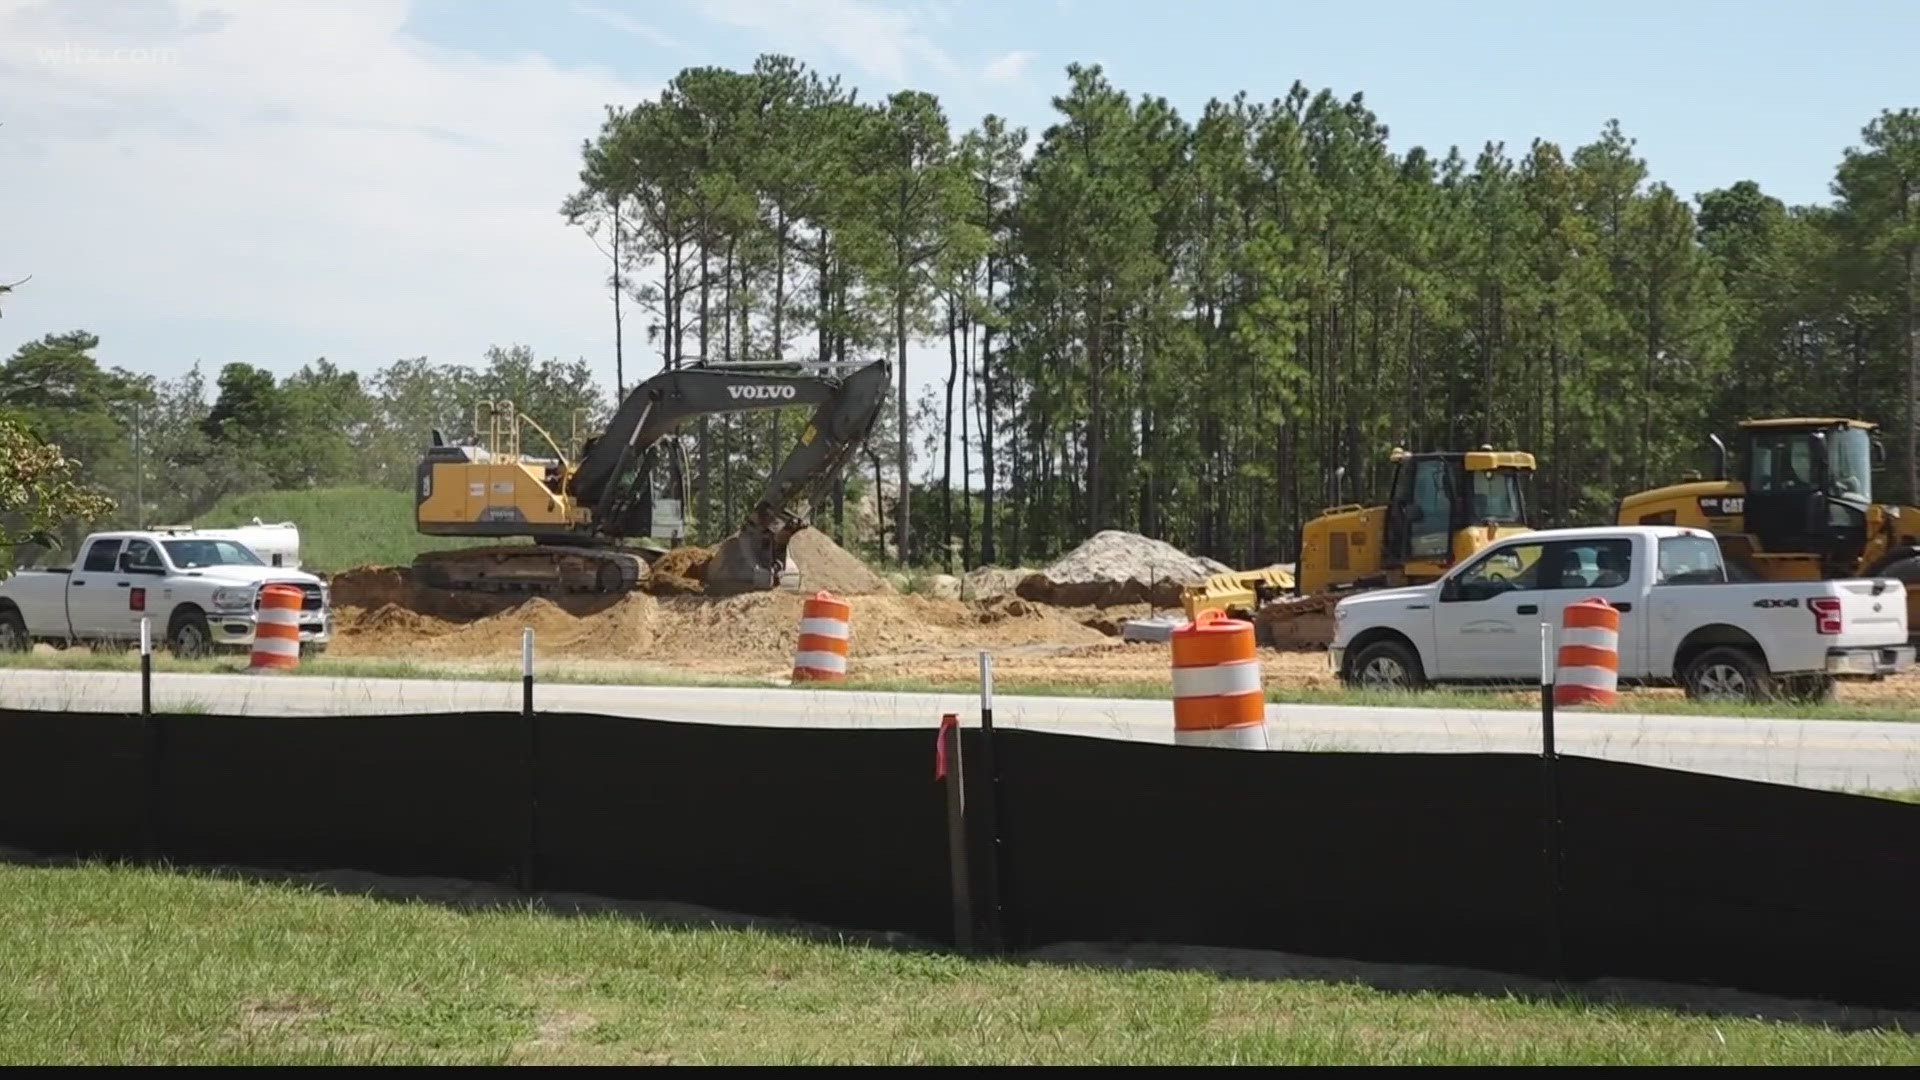 Work has been paused at the construction site of Scout Motors, the new electric vehicle plant coming to Richland County, due to permitting issues.